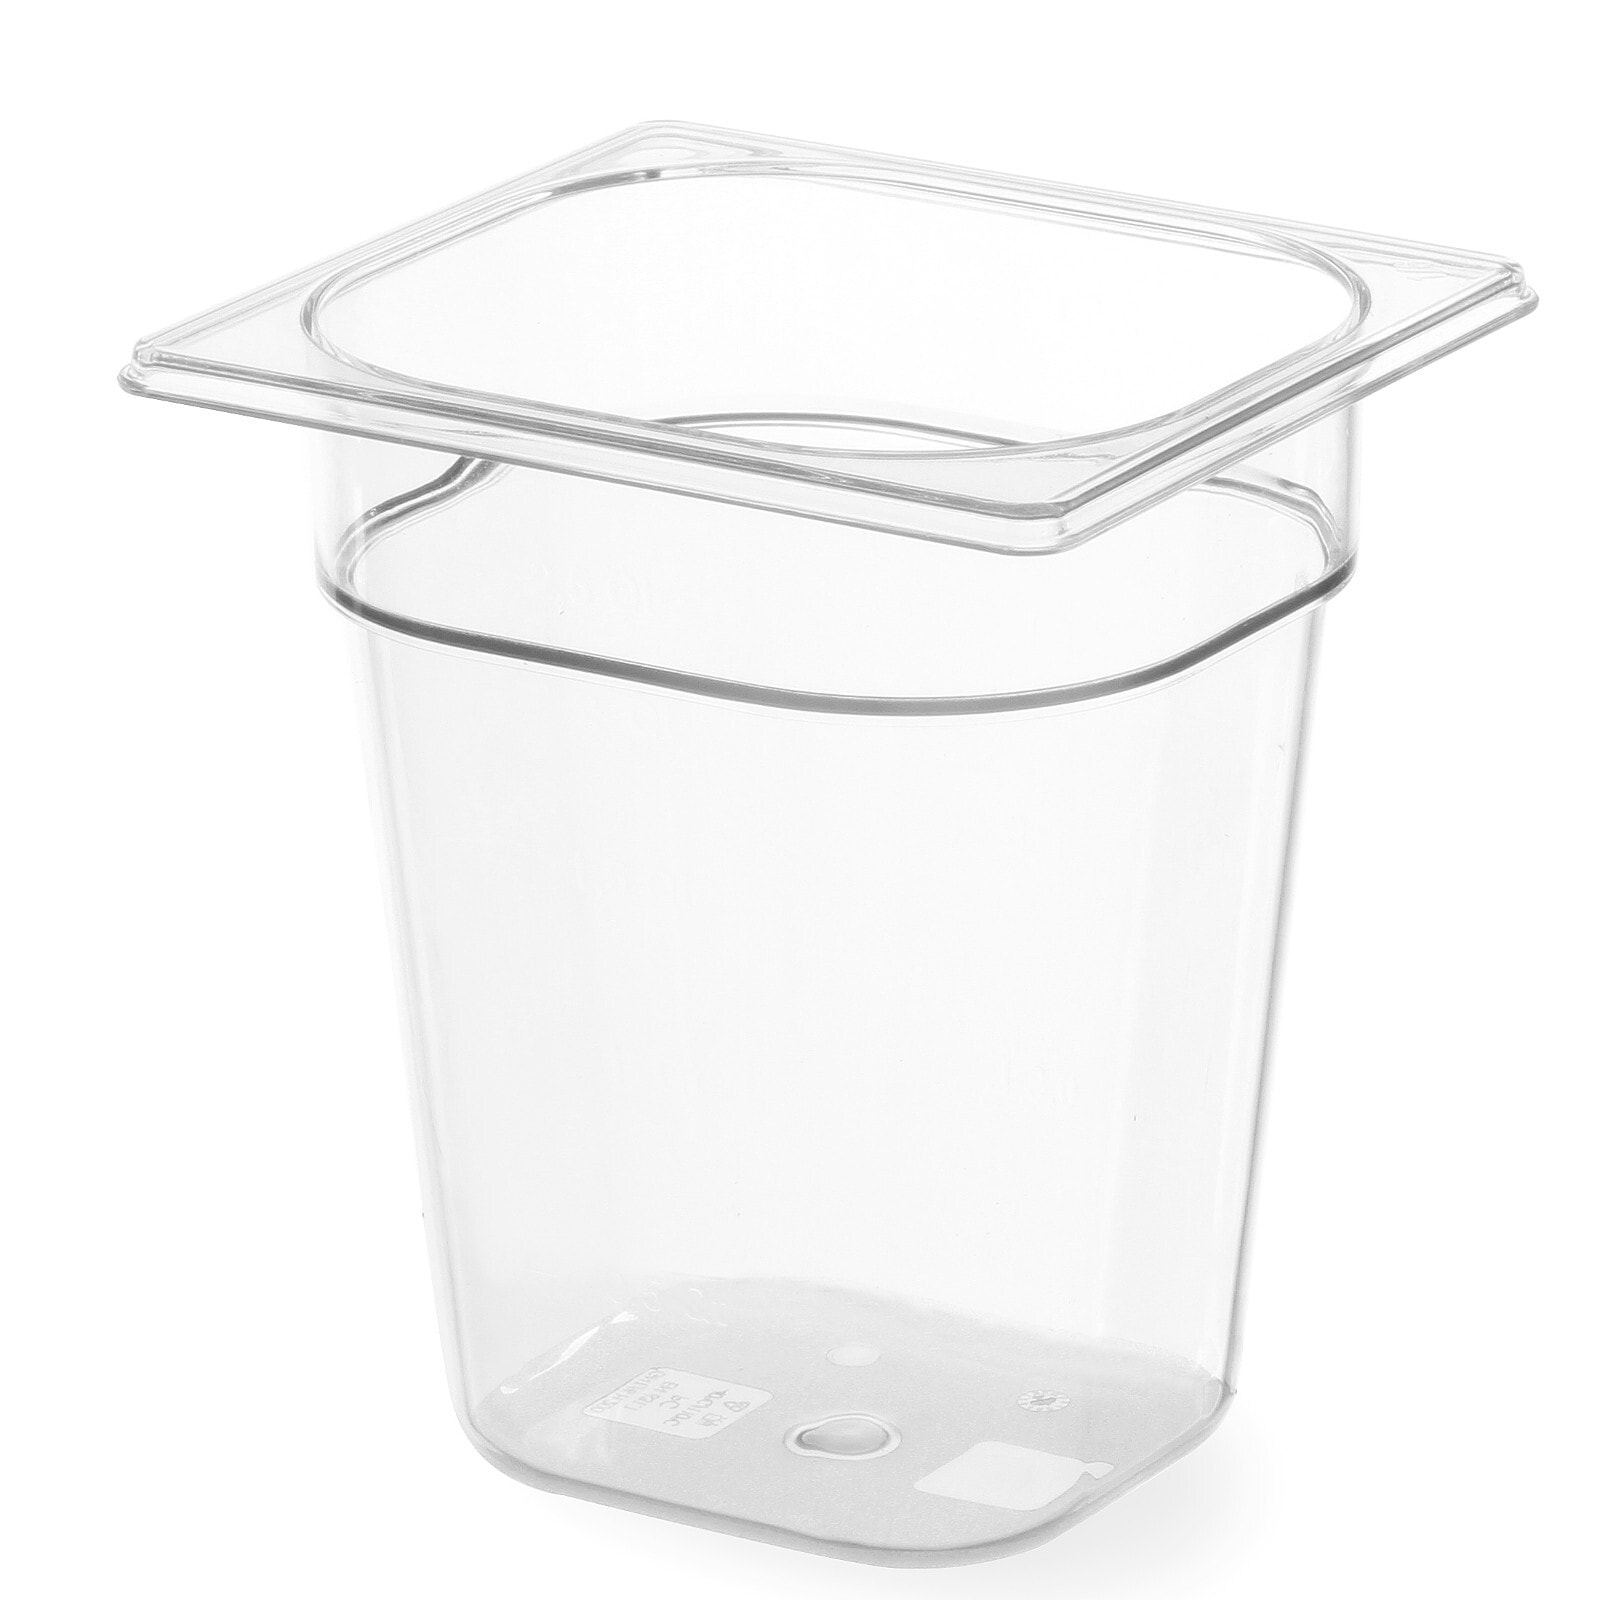 Transparent GN container made of polycarbonate GN 1/6, height 65 mm - Hendi 861738